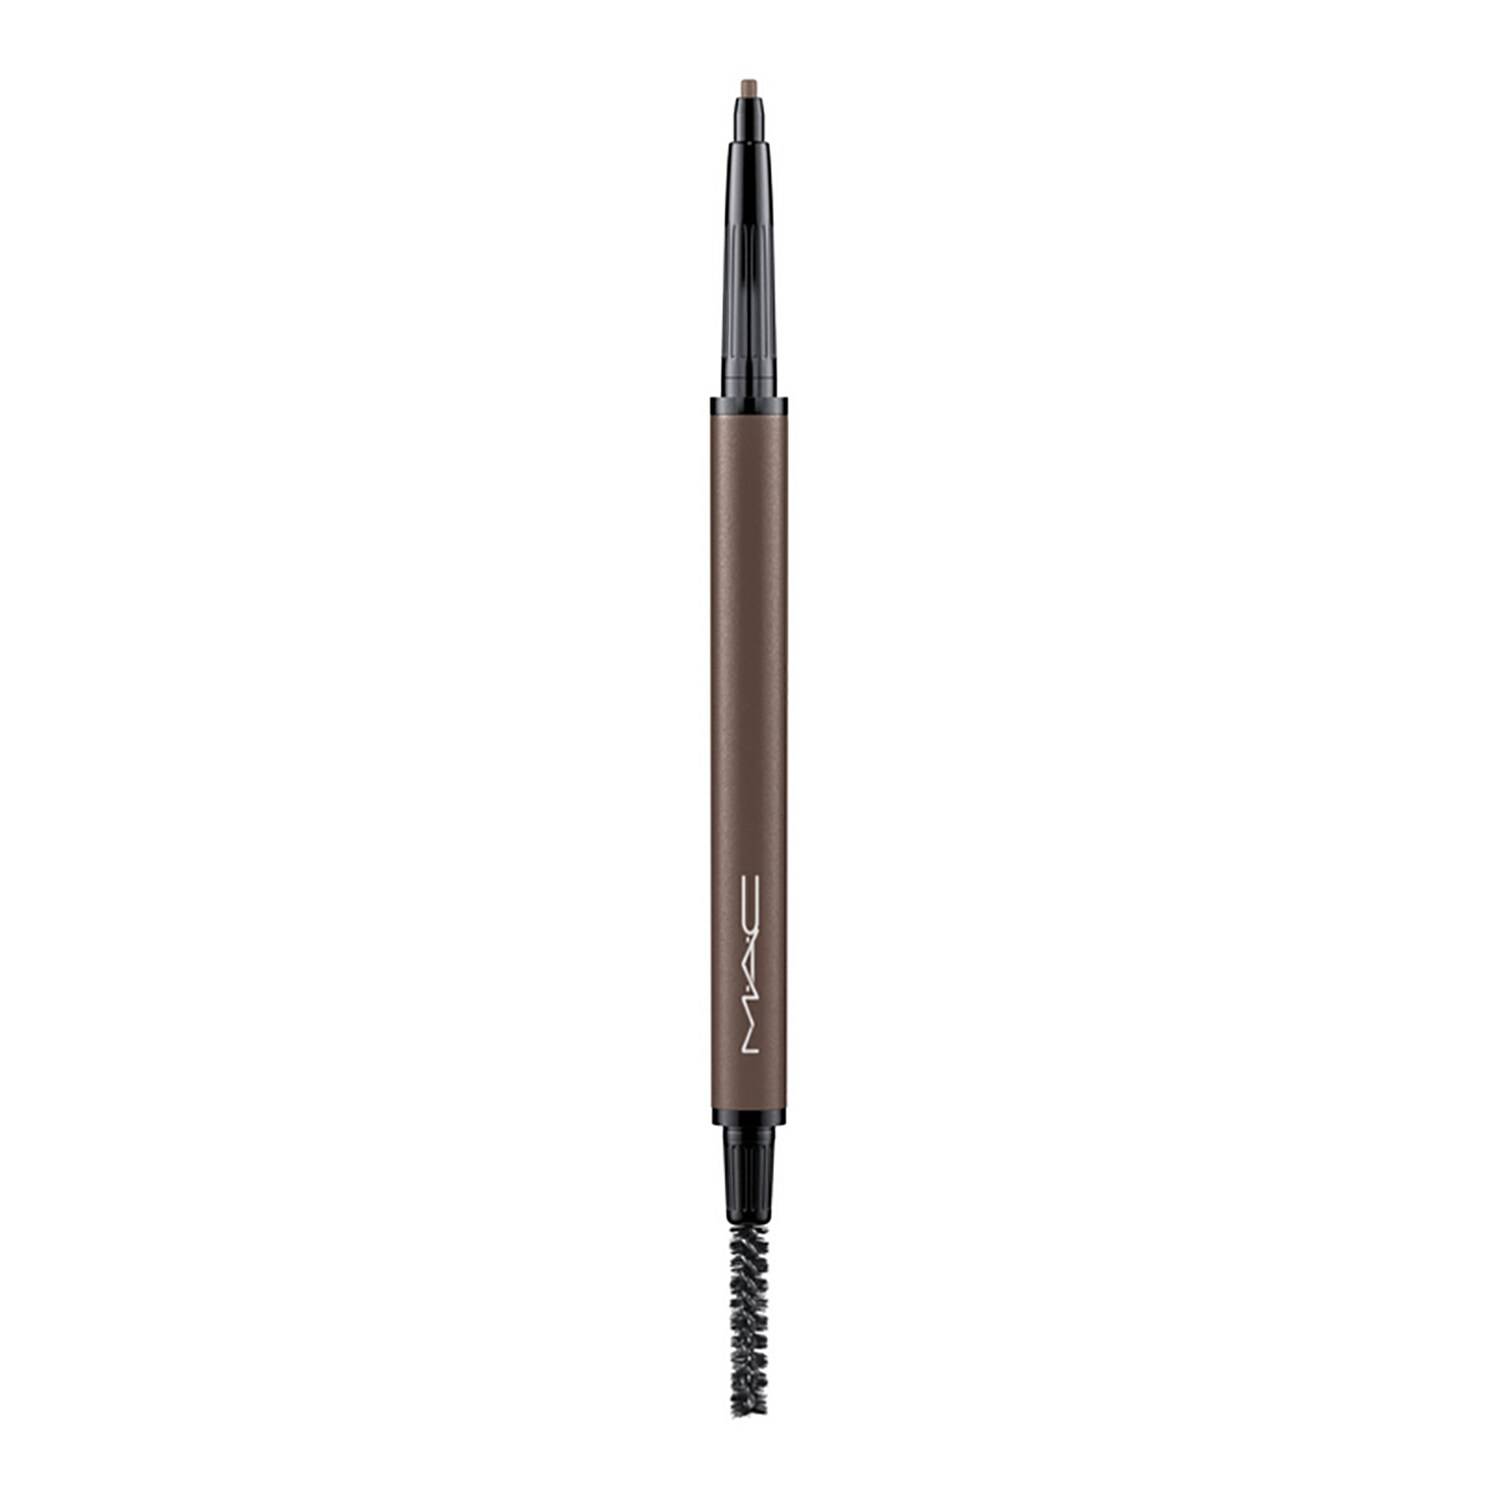 M.A.C Eye Brows Styler 0.09G Spiked